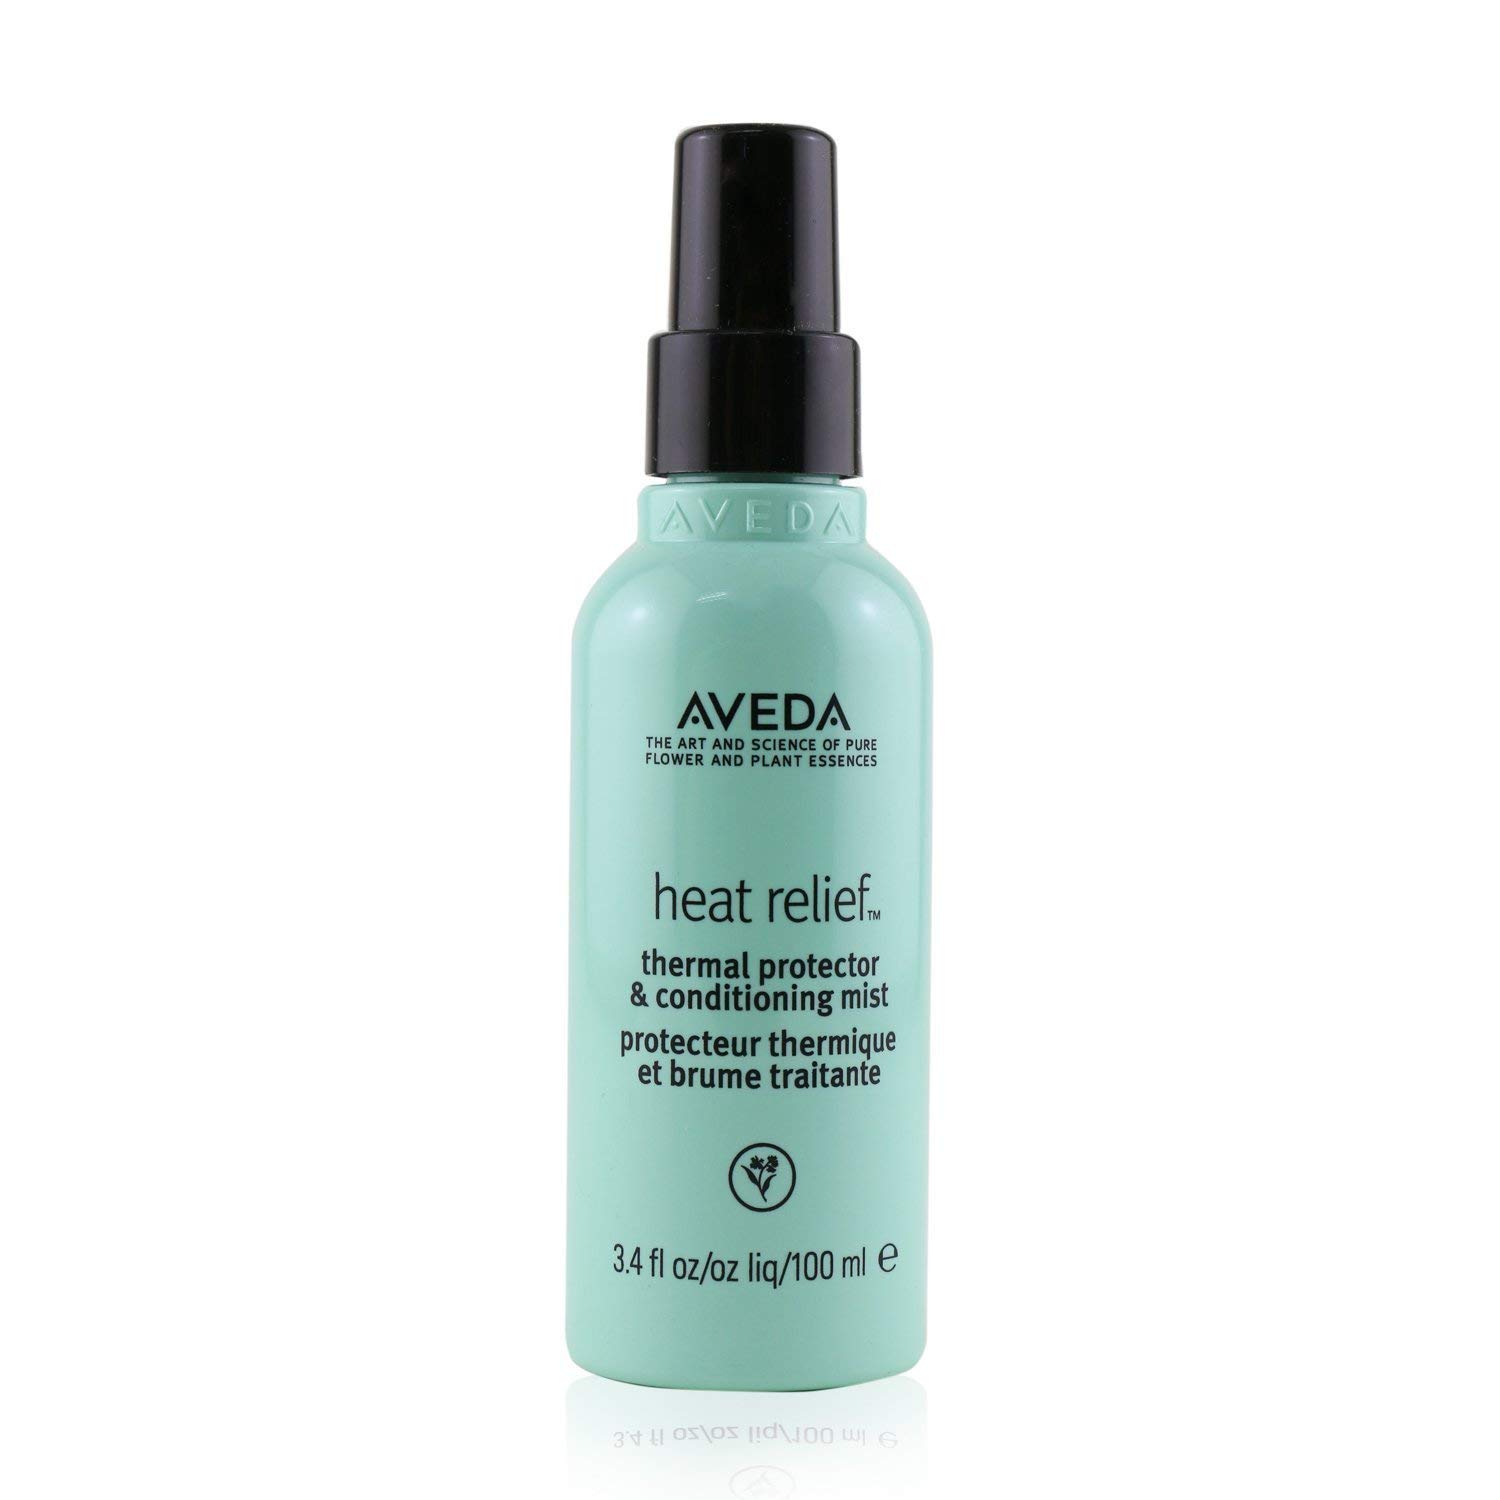 Aveda 18084004395 Heat Relief Thermal Protector & Conditioning Mist,